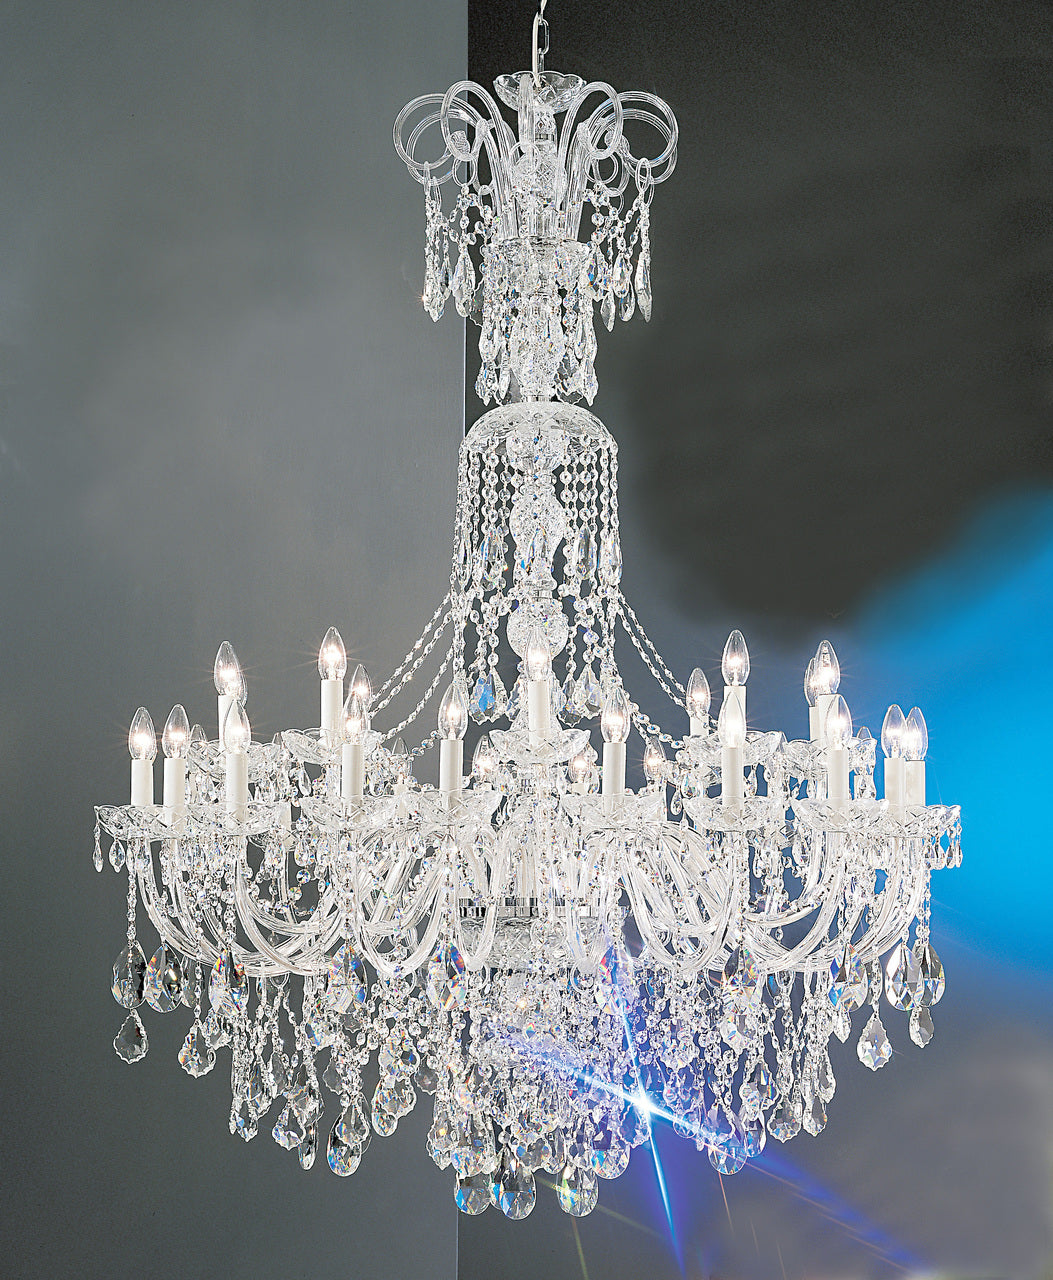 Classic Lighting 8264 G C Bohemia Crystal/Glass Chandelier in 24k Gold (Imported from Italy)